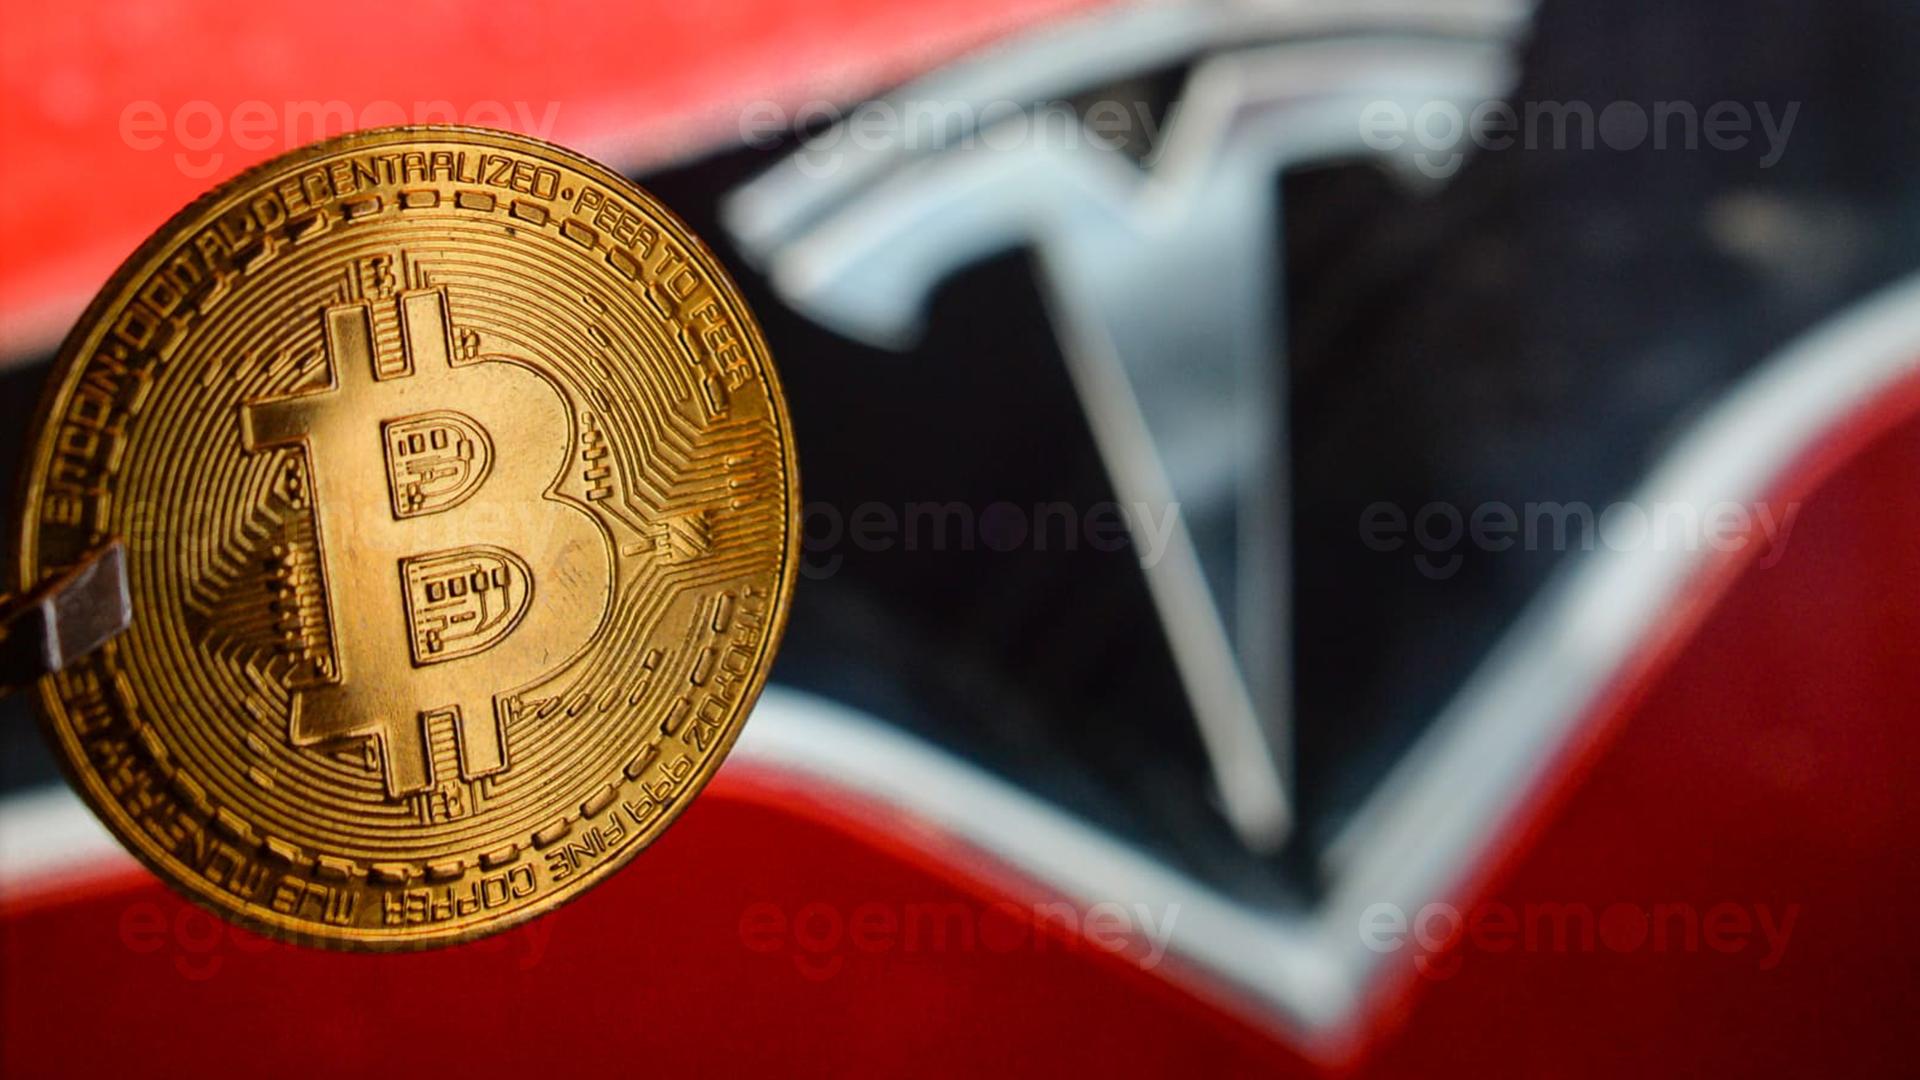 Tesla Did Not Make Any Bitcoin (BTC) Sales in the Last Year